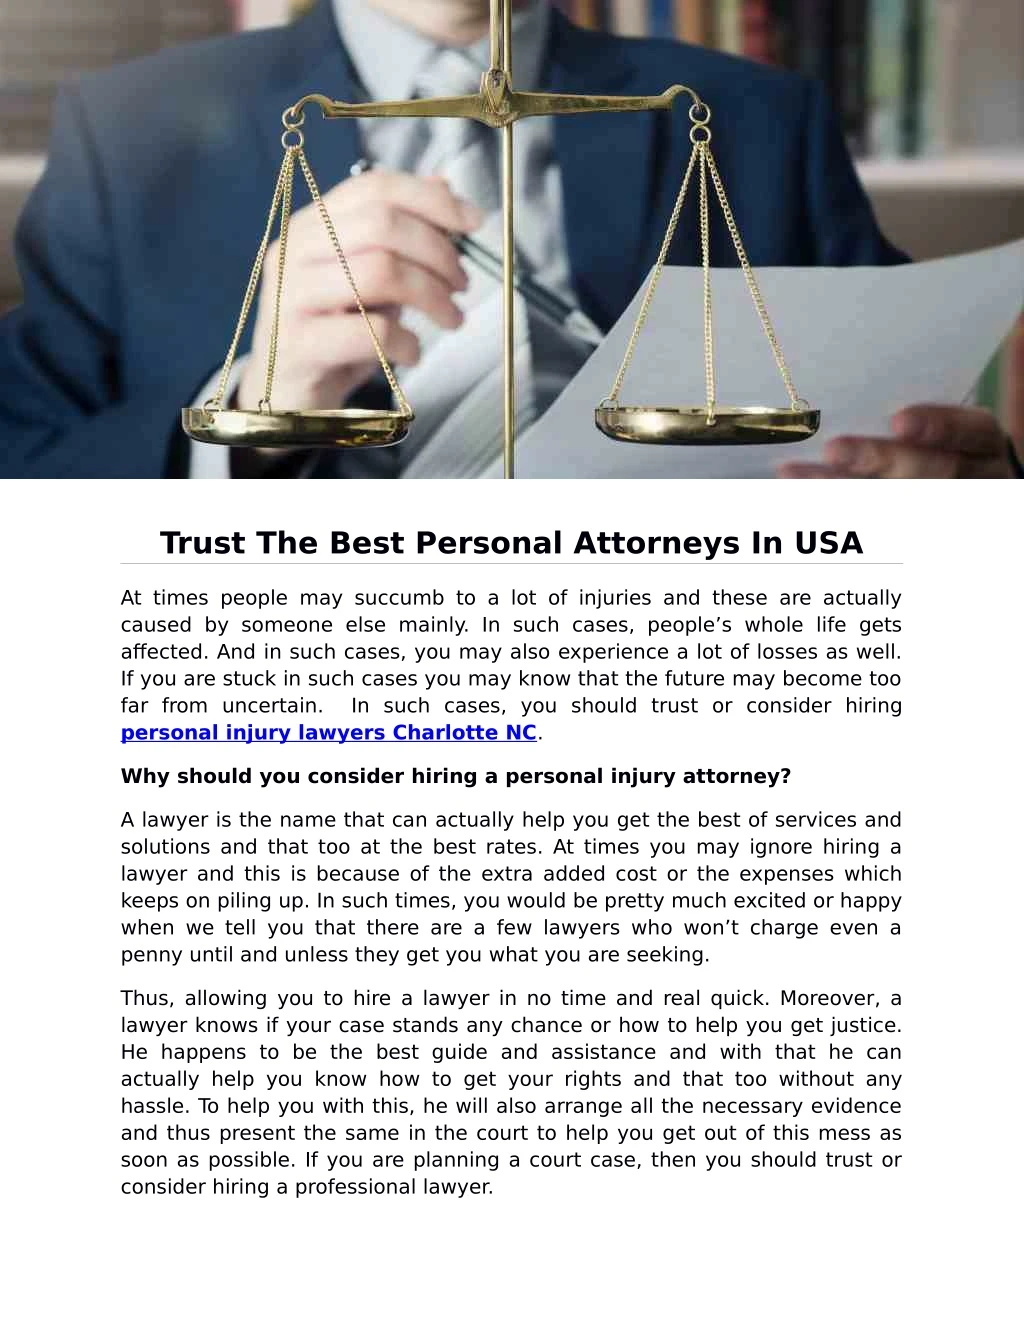 trust the best personal attorneys in usa